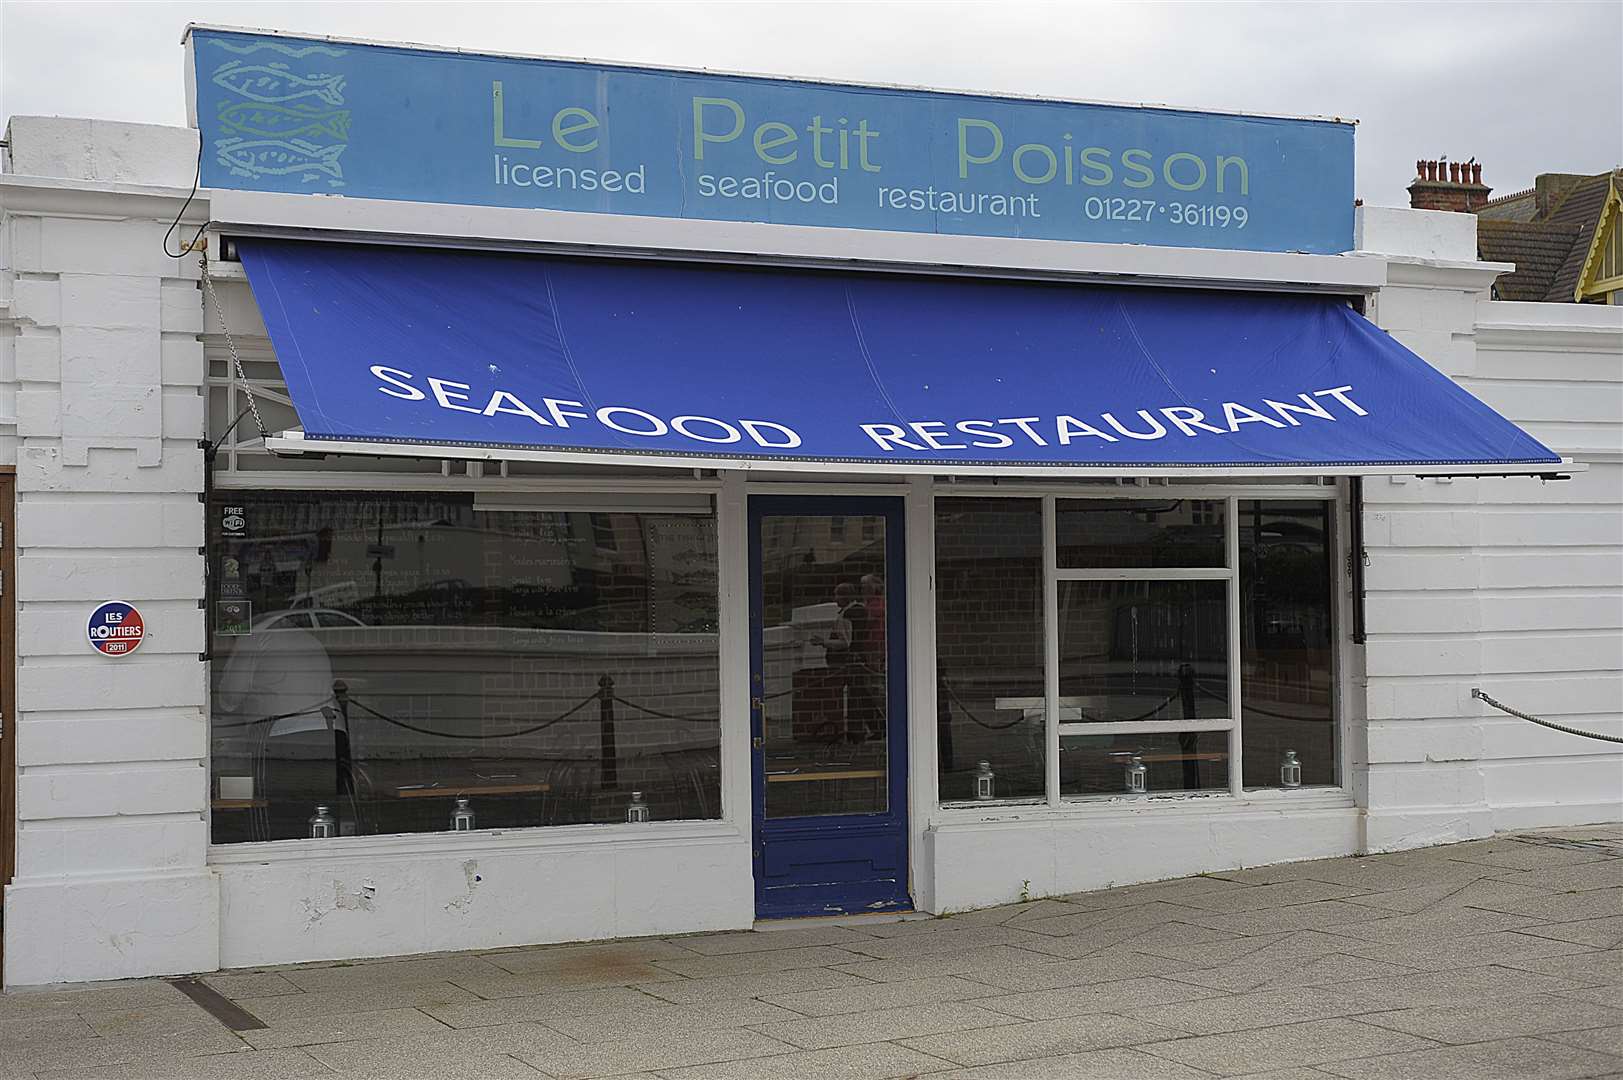 Le Petit Poisson, pictured in 2011 when it became the first restaurant in Herne Bay to be listed in the Michelin guide. Picture: Barry Goodwin